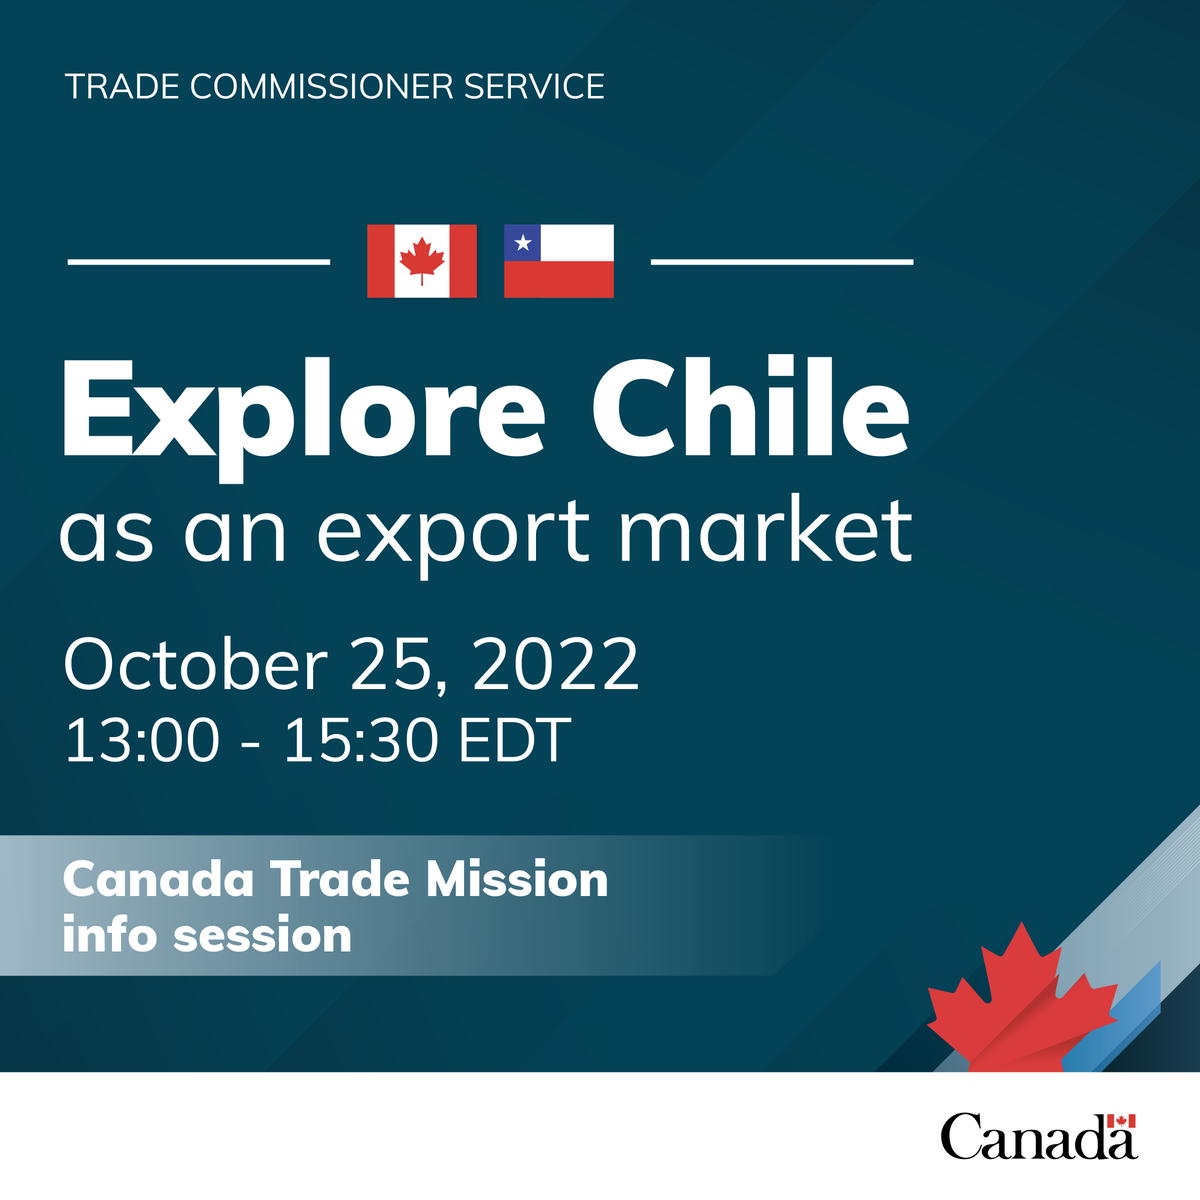 📢Hey #CdnBusinesses in #CleanTech sectors! Join us to learn about an upcoming Canada Trade Mission to Chile led by Minister Ng and gain insights on exporting tools and tips from experts. Register before October 24: ow.ly/qu4x50LfV28